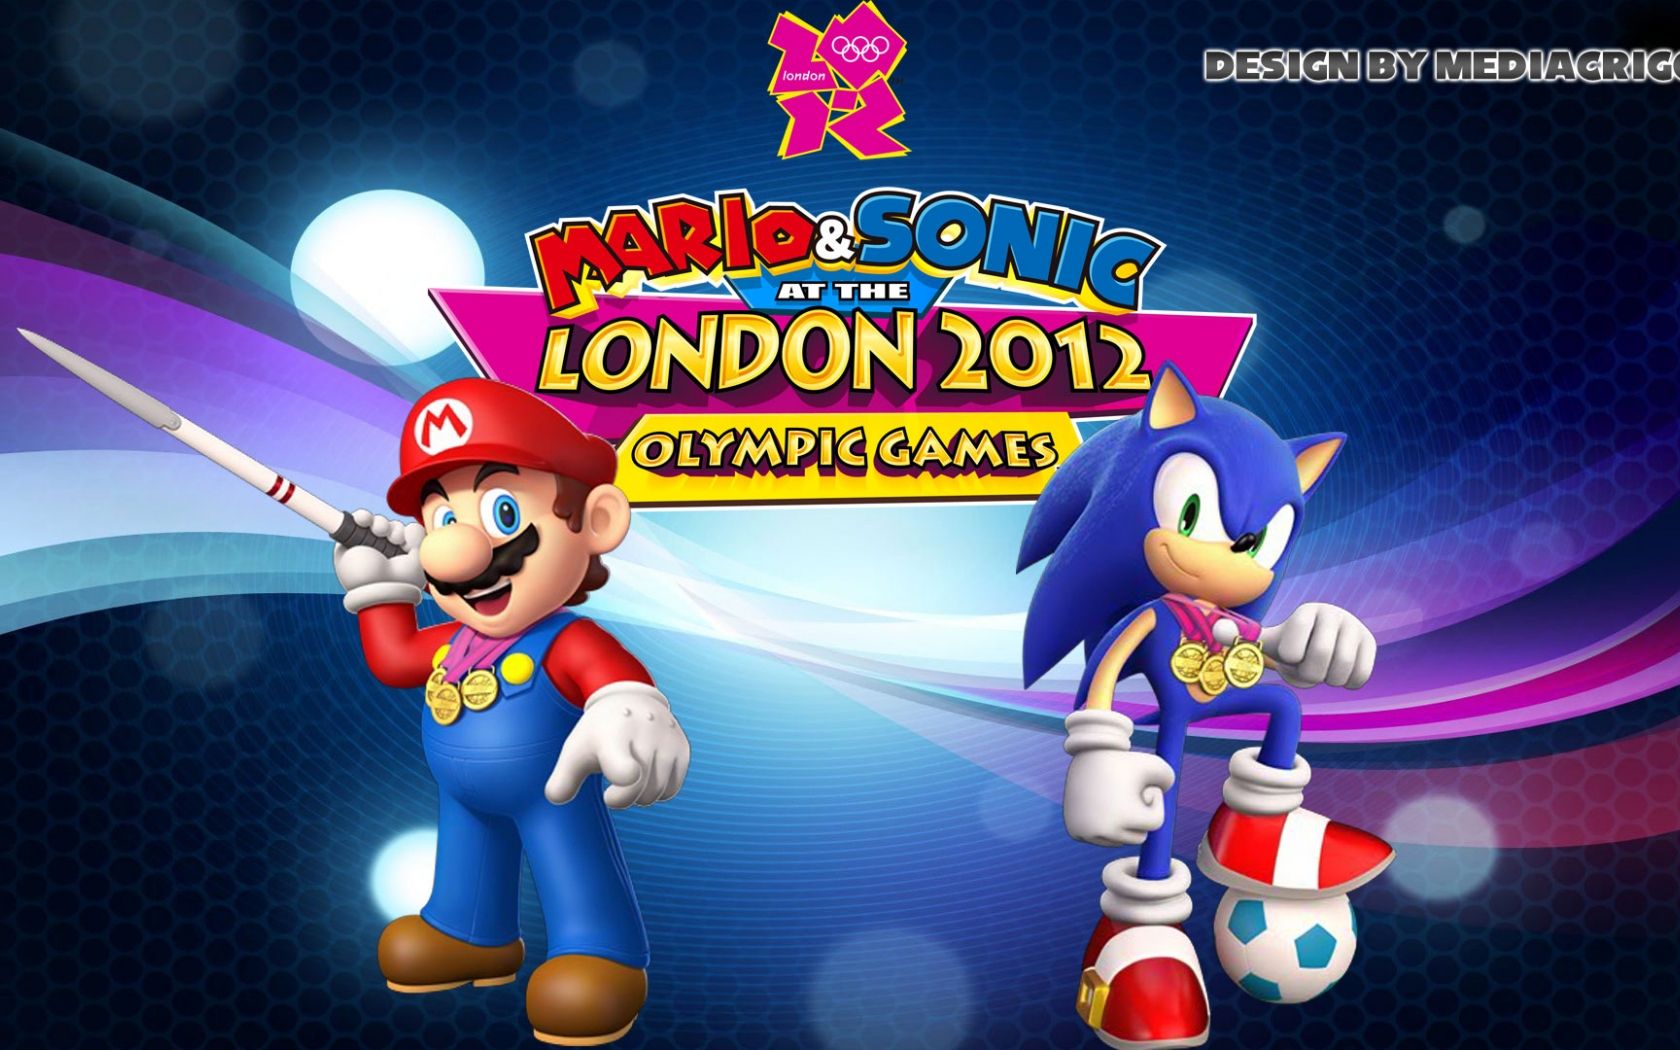 Mario & Sonic at the London 2012 Olympic games